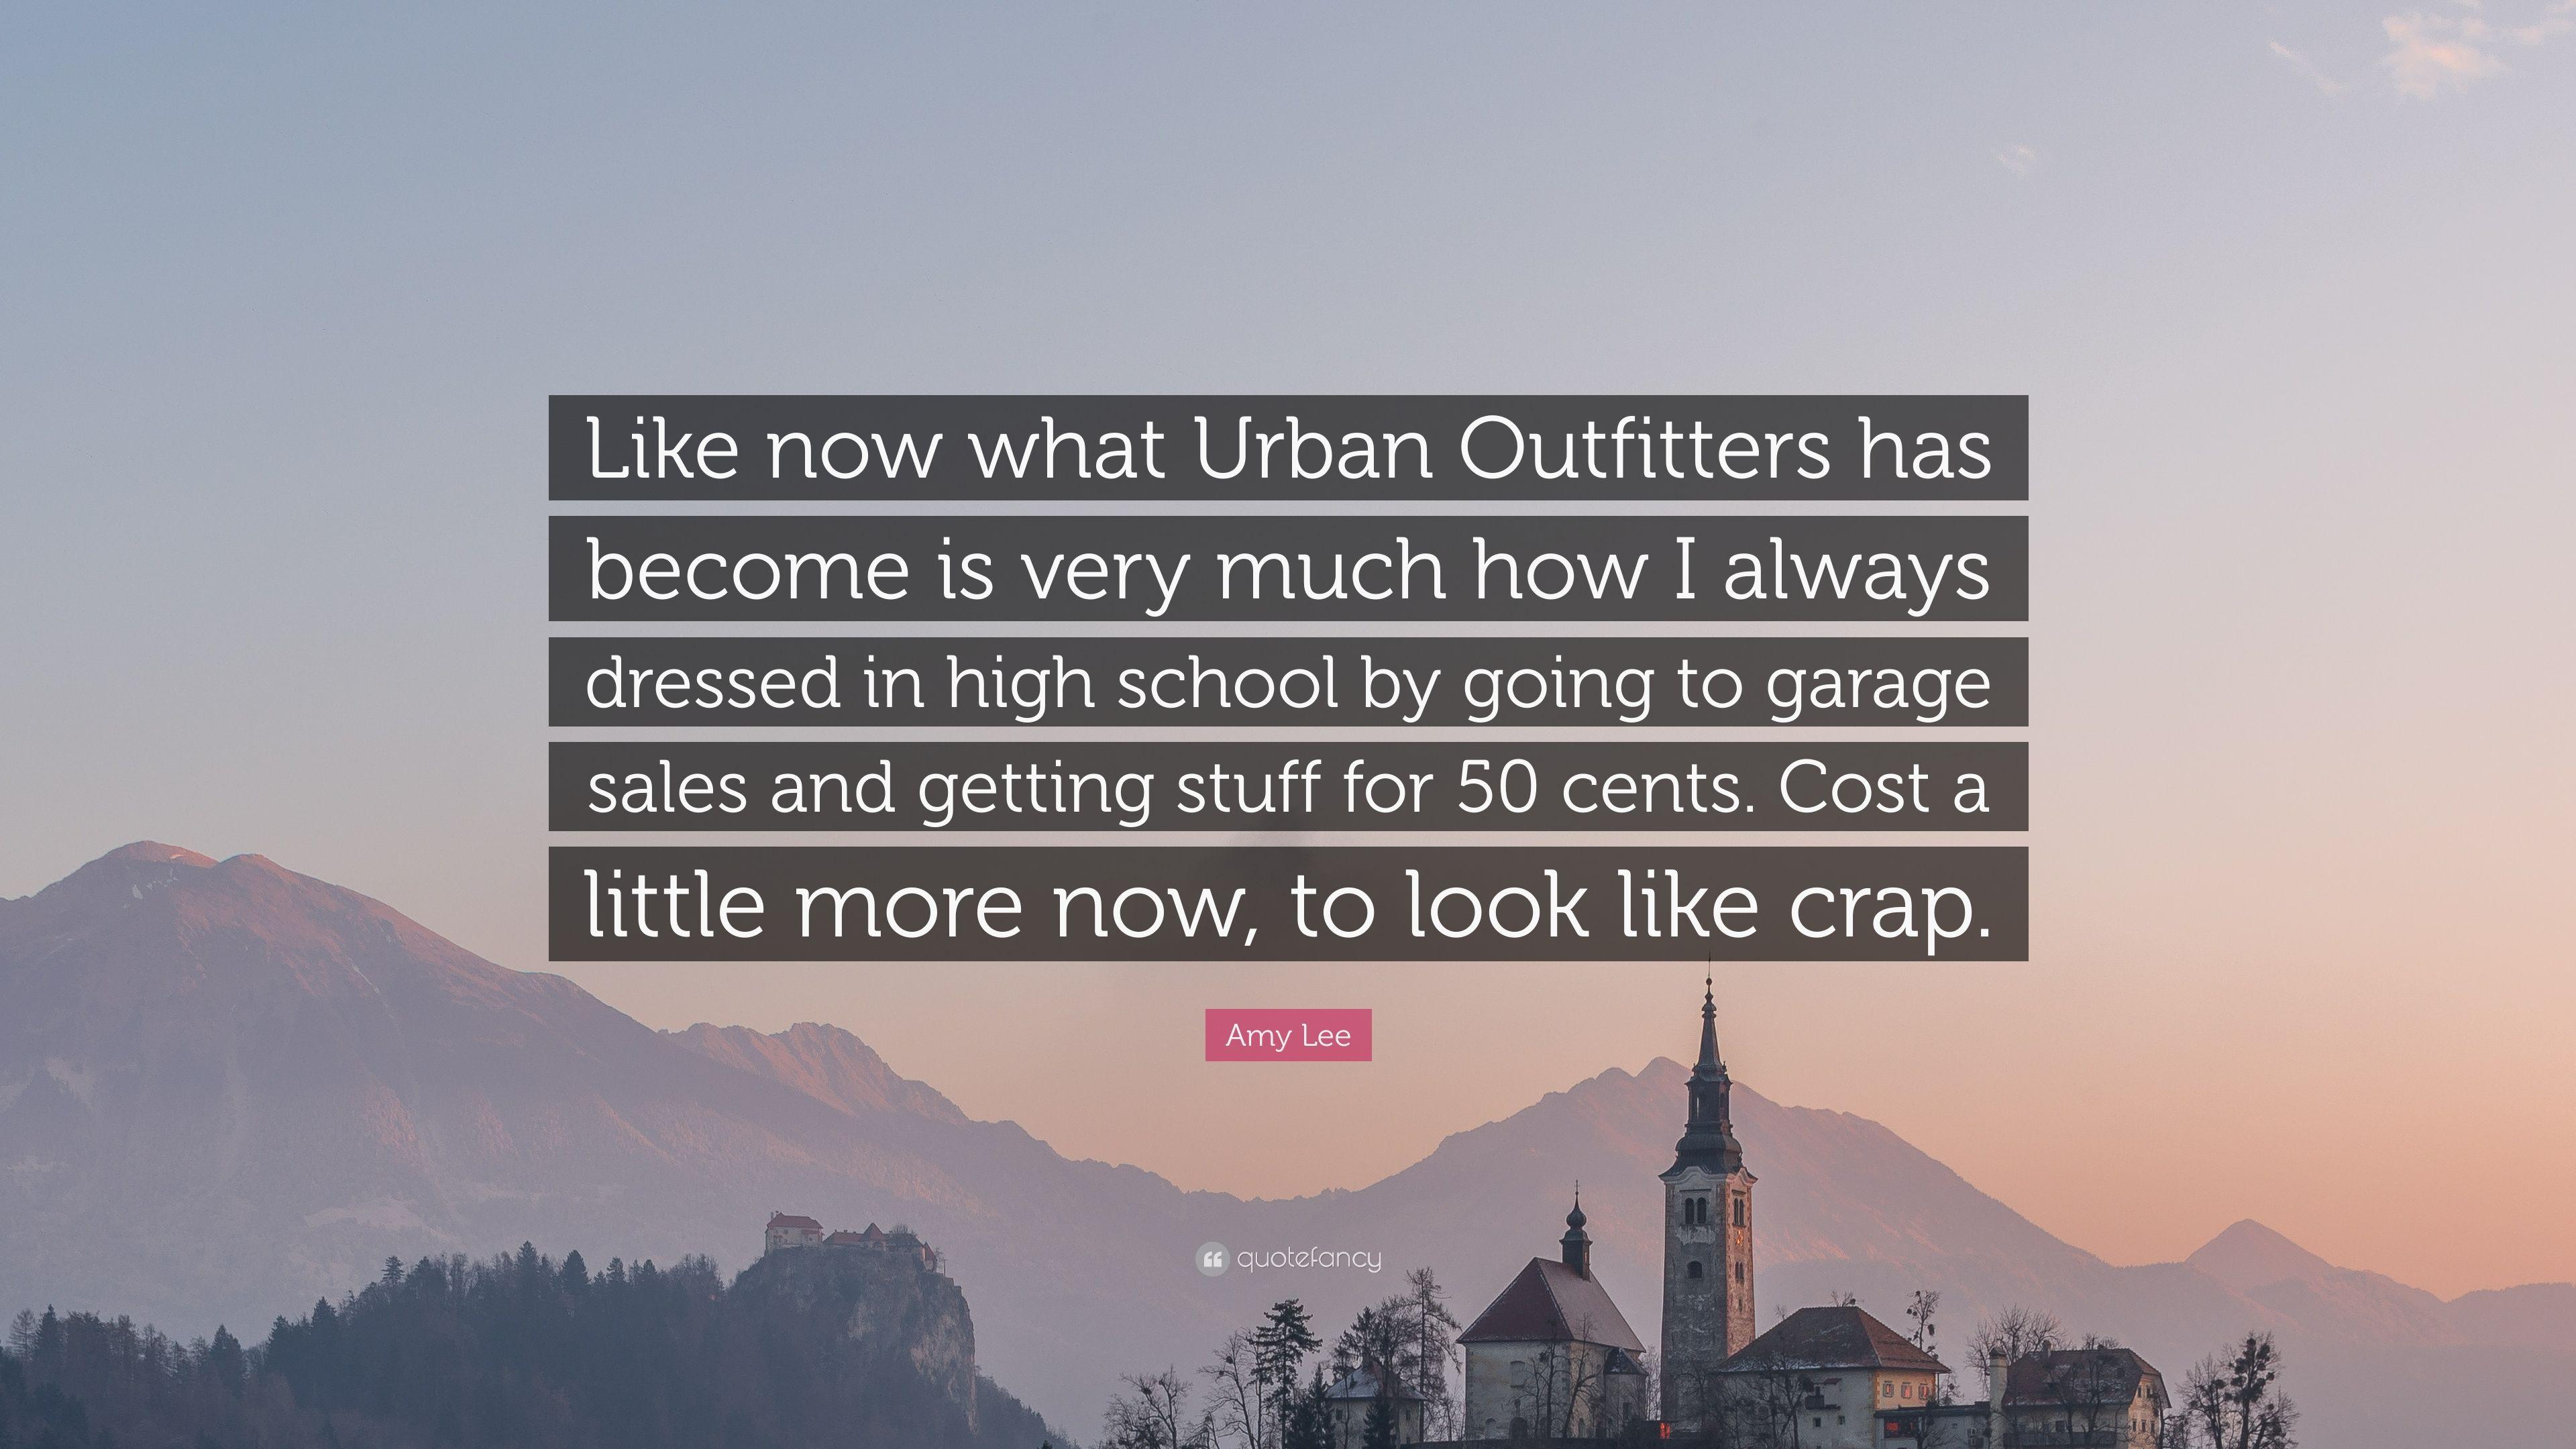 Amy Lee Quote: “Like now what Urban Outfitters has become is very